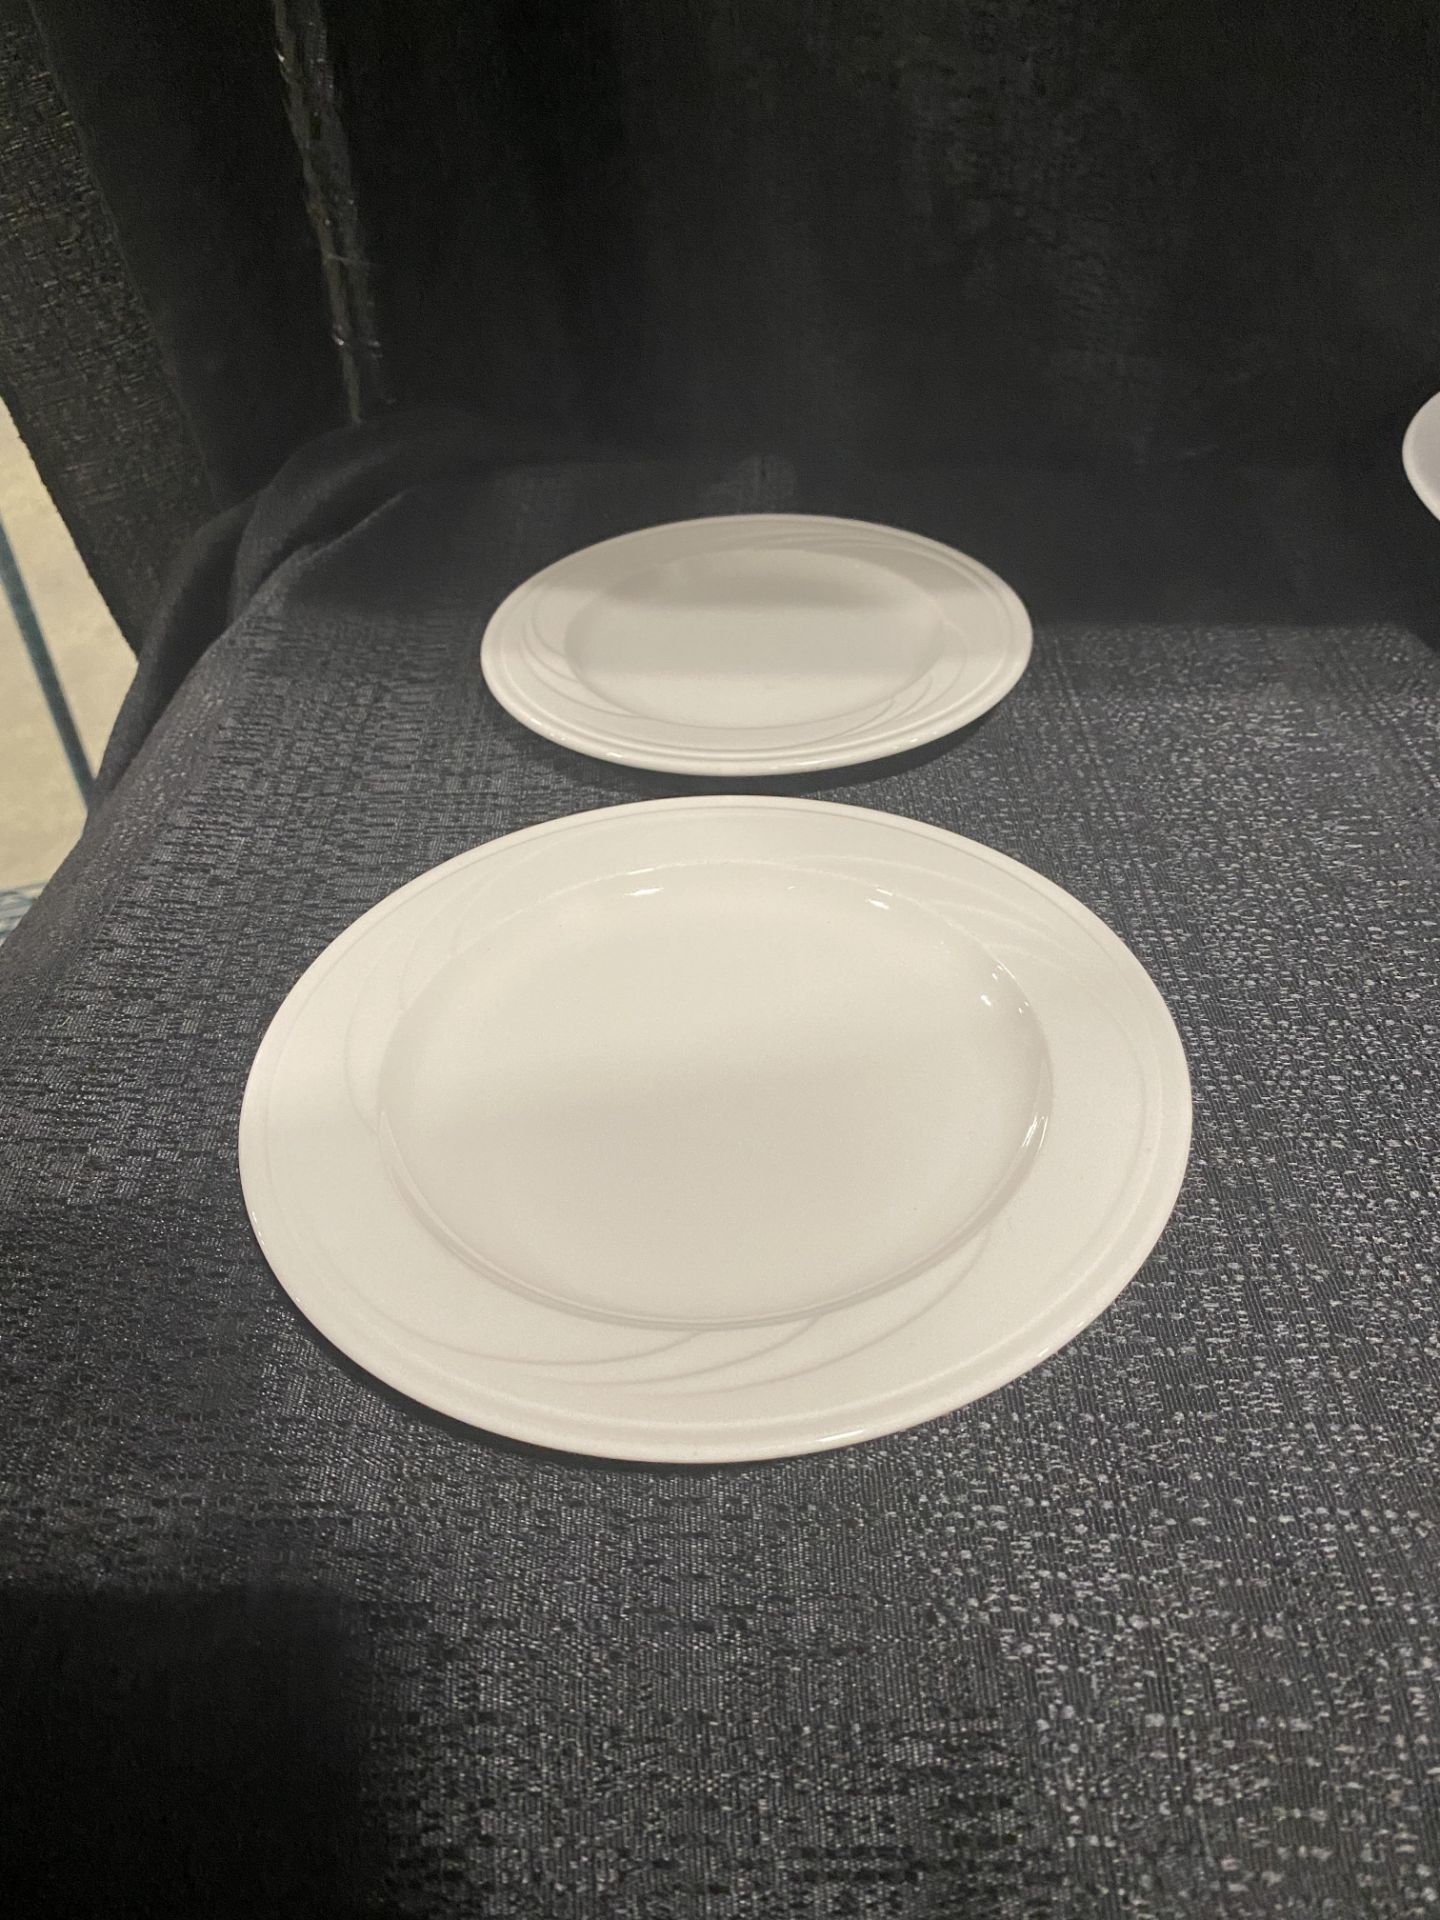 (40 Each) 6 Piece China Set c/o: (40) 12"White Dinner Plate, (40) 11.5" White Shallow Bowl, (40) - Image 2 of 4